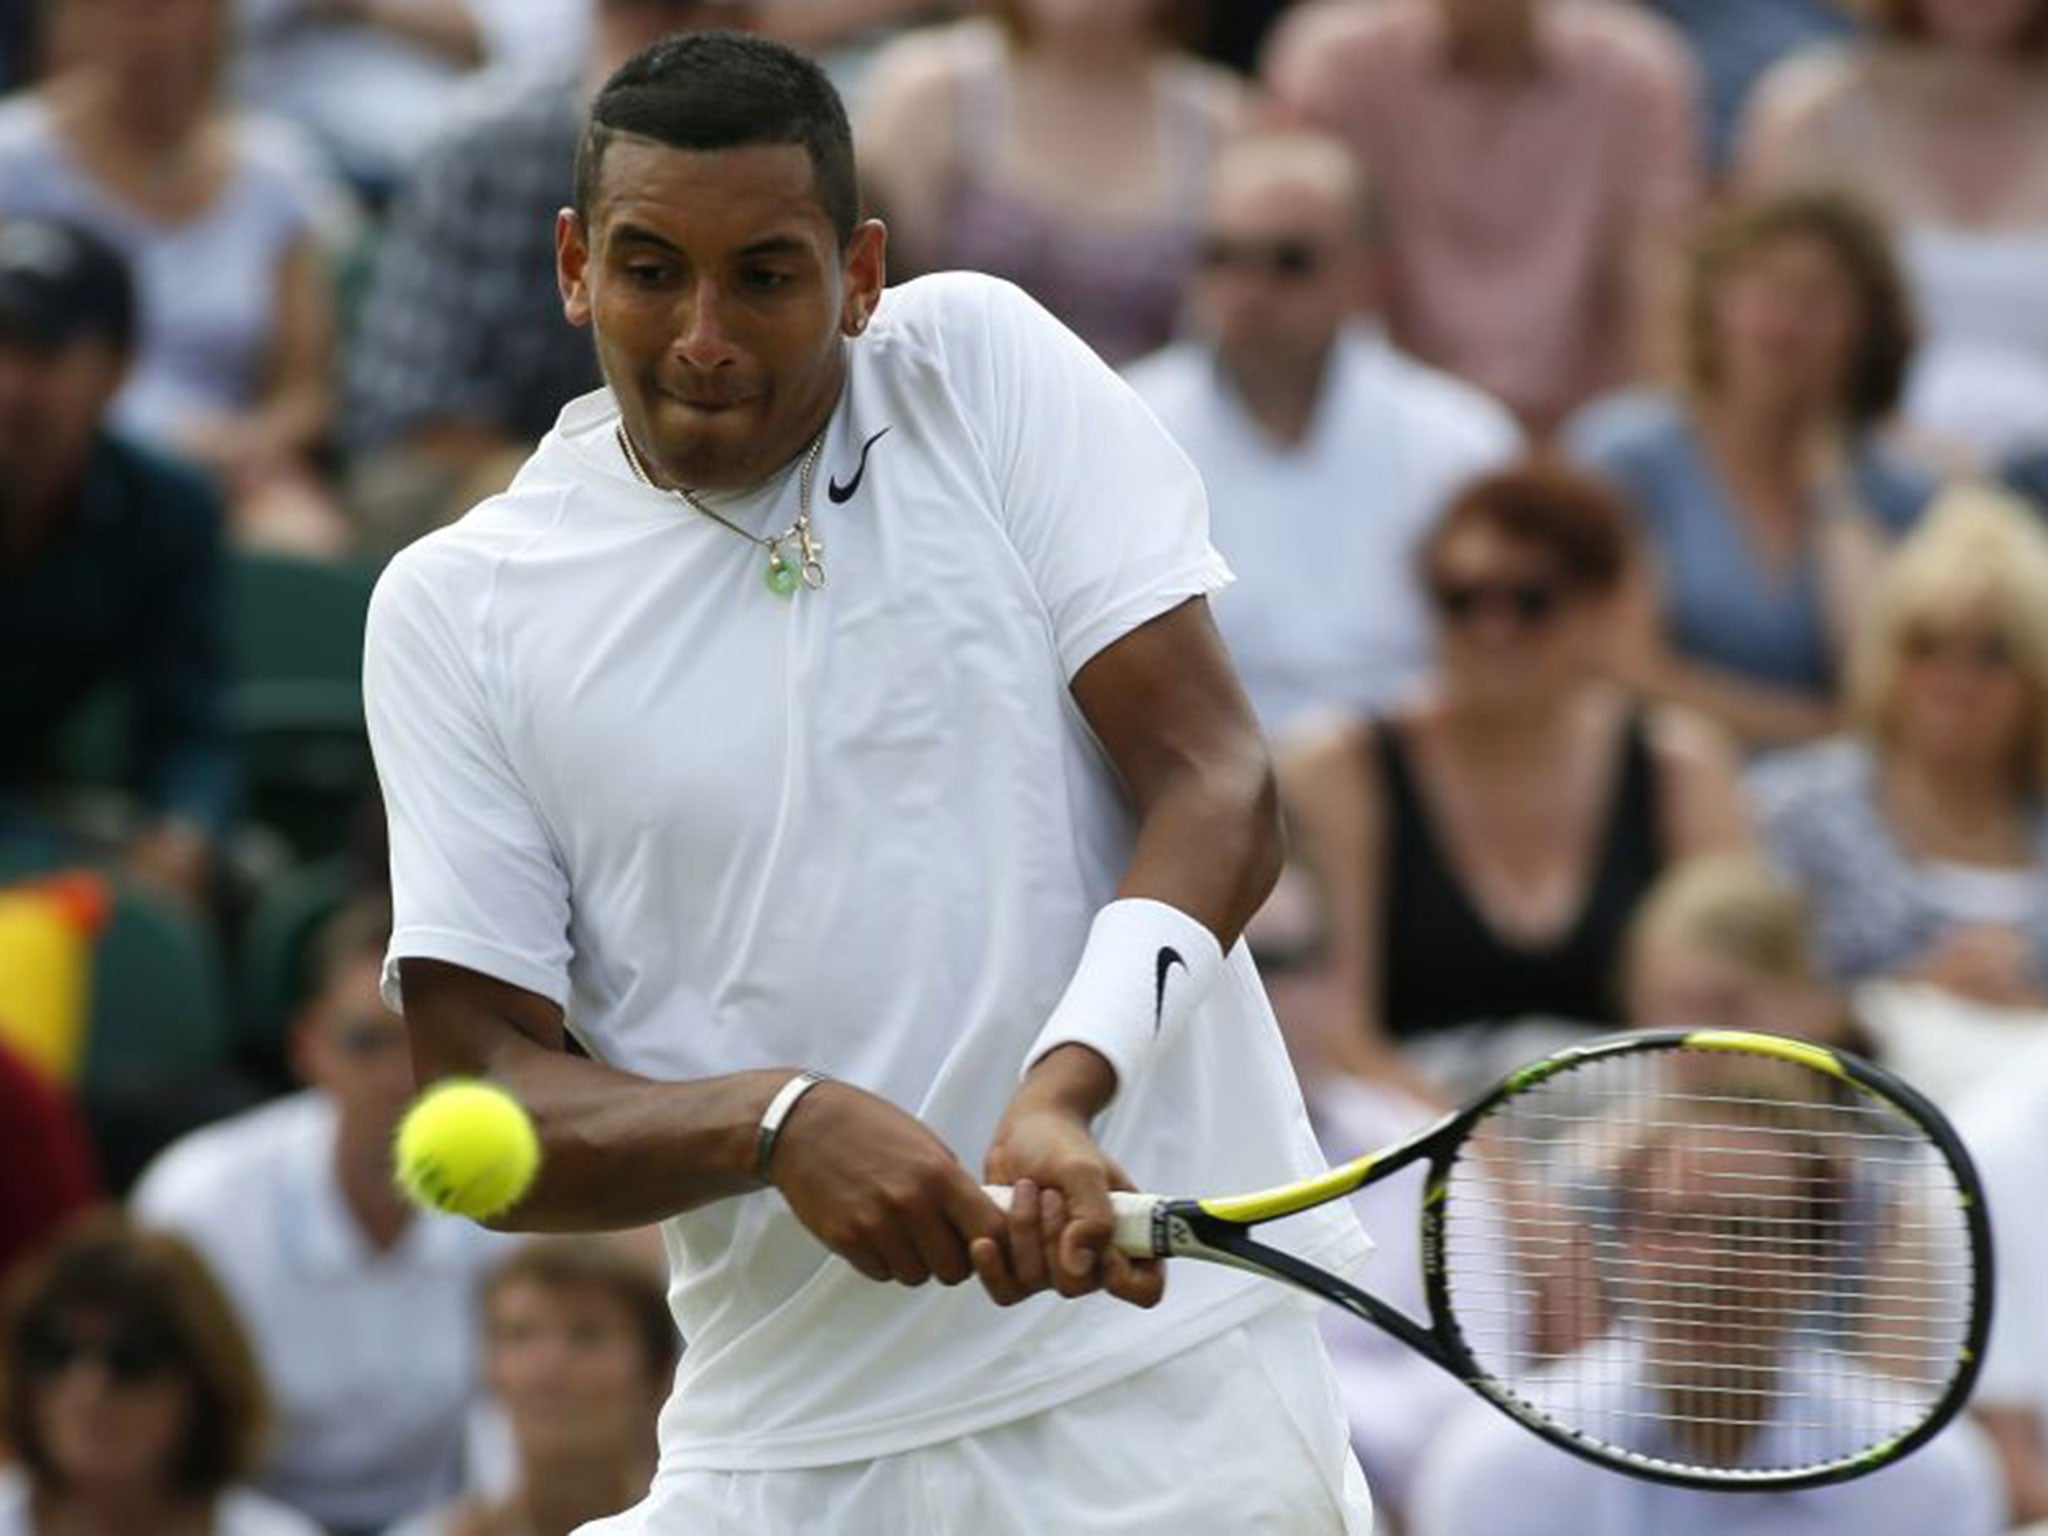 Nick Kyrgios earned new admirers following his gritty, five-set victory over Richard Gasquet